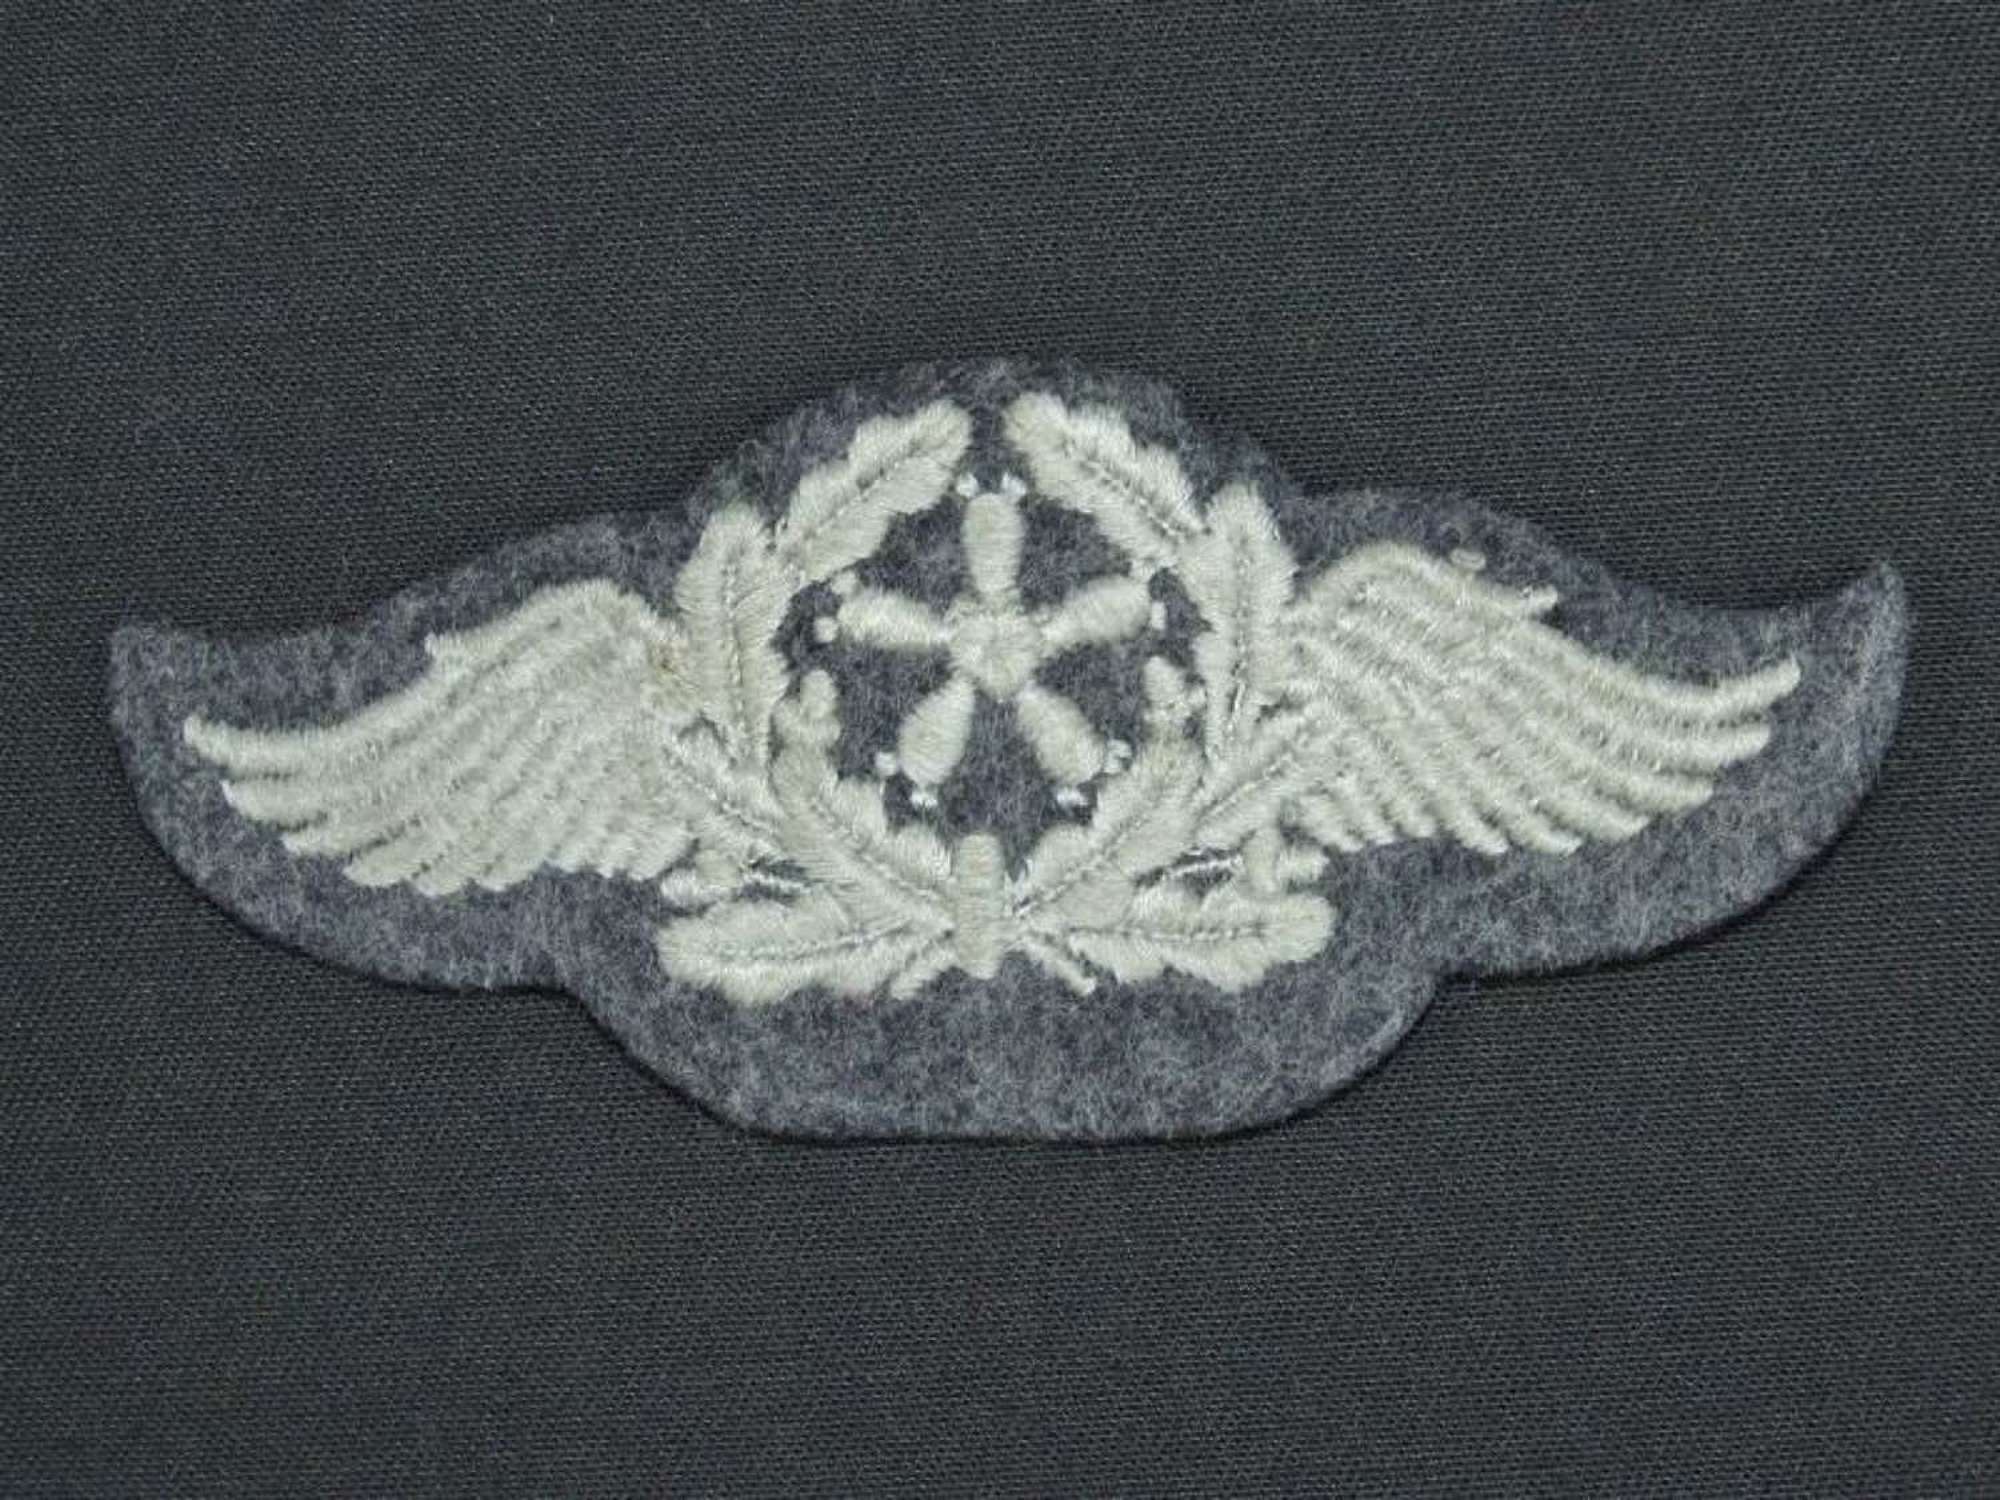 Luftwaffe Specialty Badge for Flying Technical Personnel